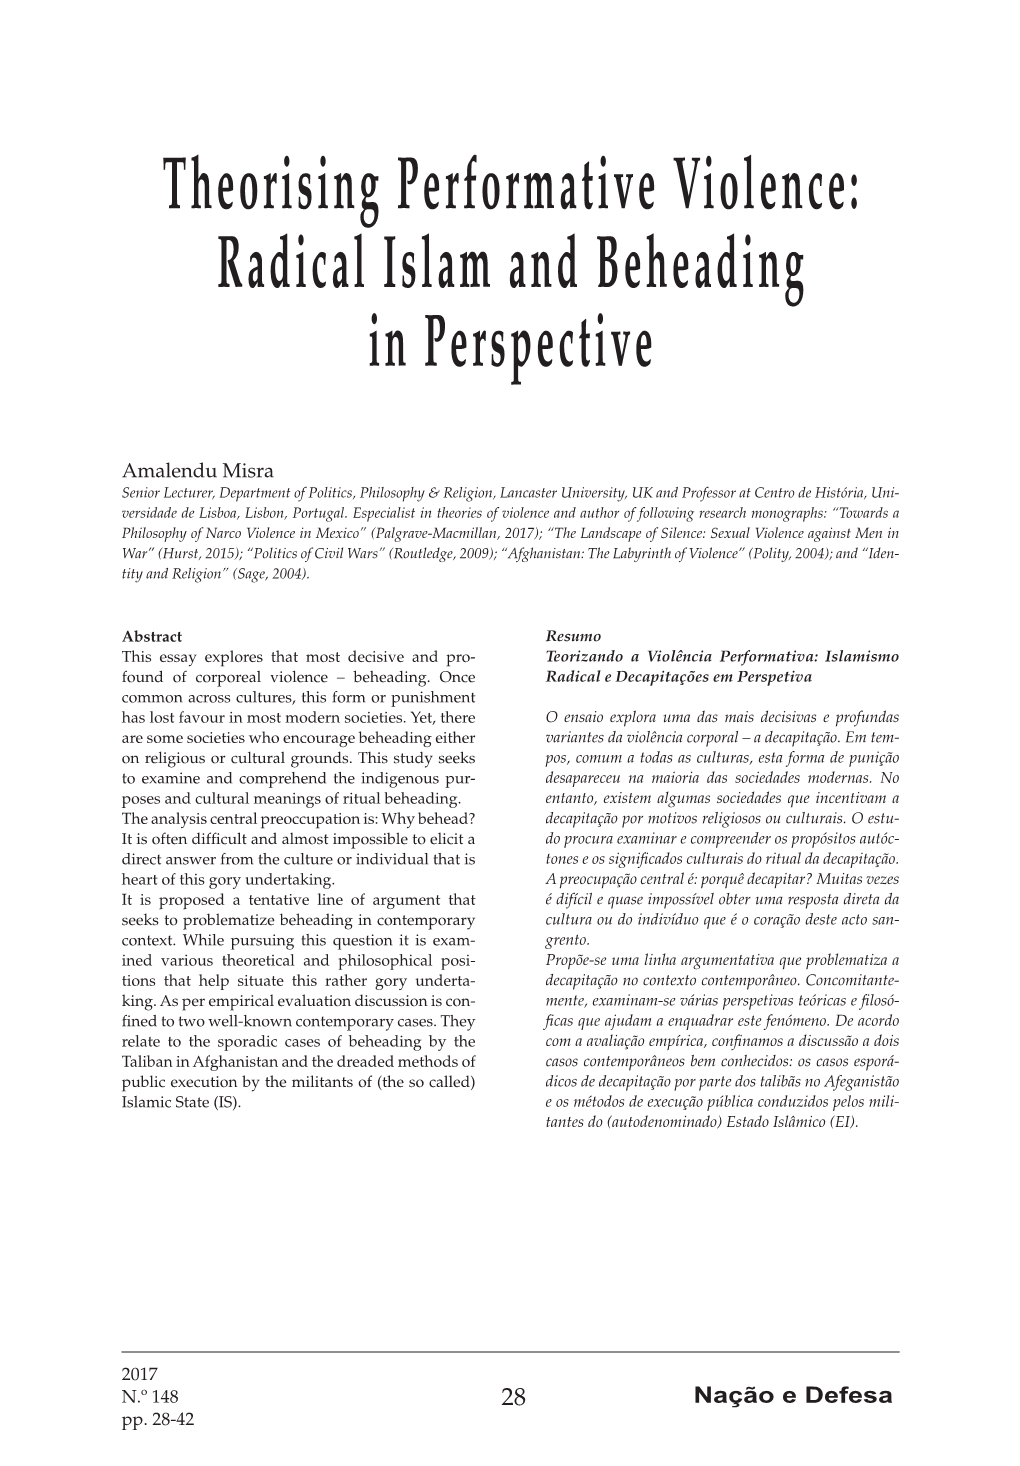 Theorising Performative Violence: Radical Islam and Beheading in Perspective